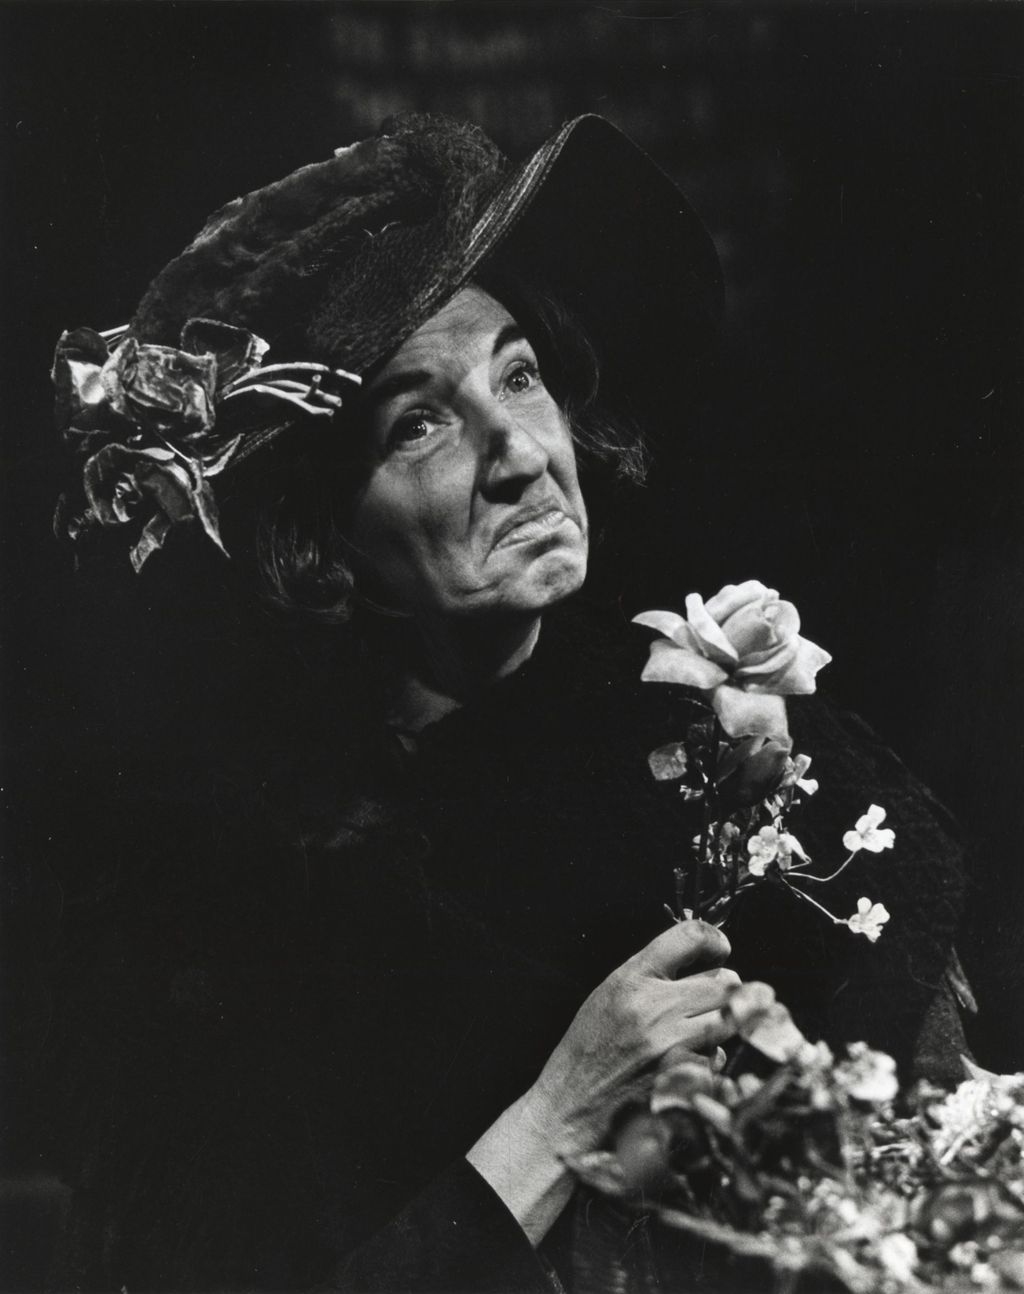 Rose Bormacher on stage in a production of "The Threepenny Opera" at Hull-House Theater